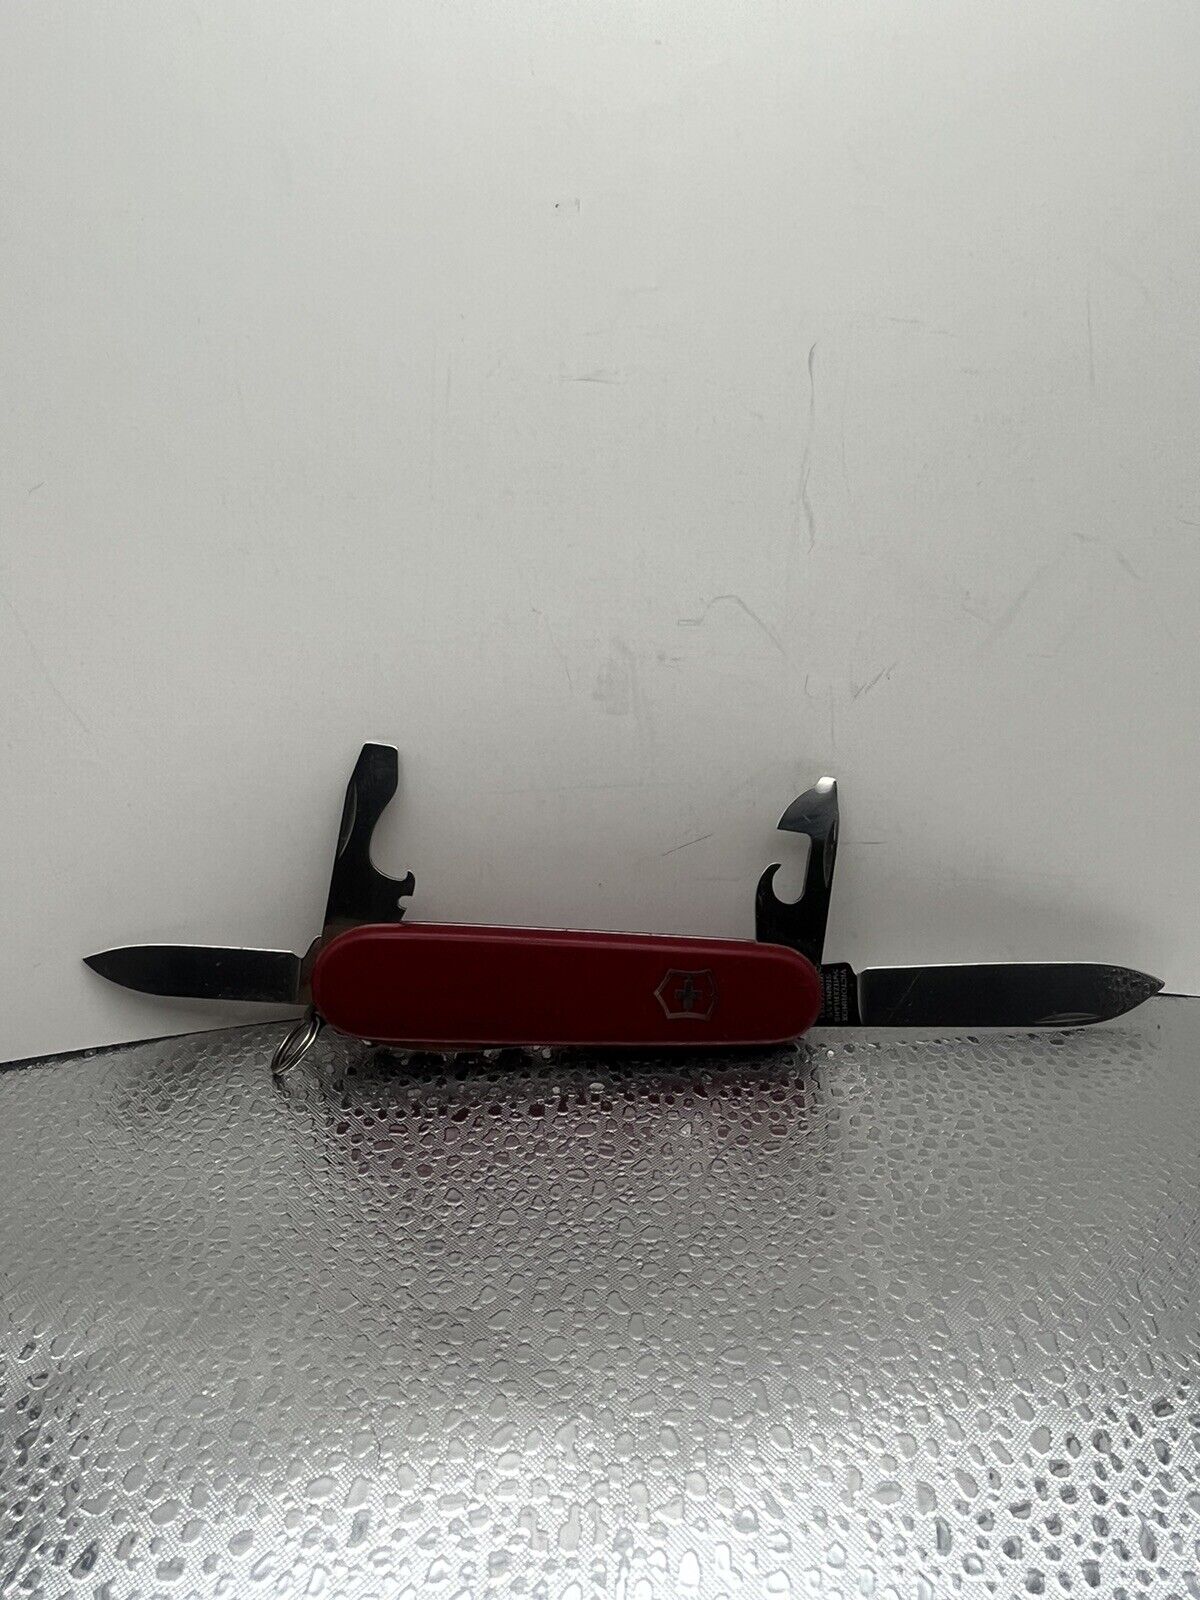 VICTORINOX RED OFFICER SWISS ARMY KNIFE 6-TOOL SUISSE ROSTFREI